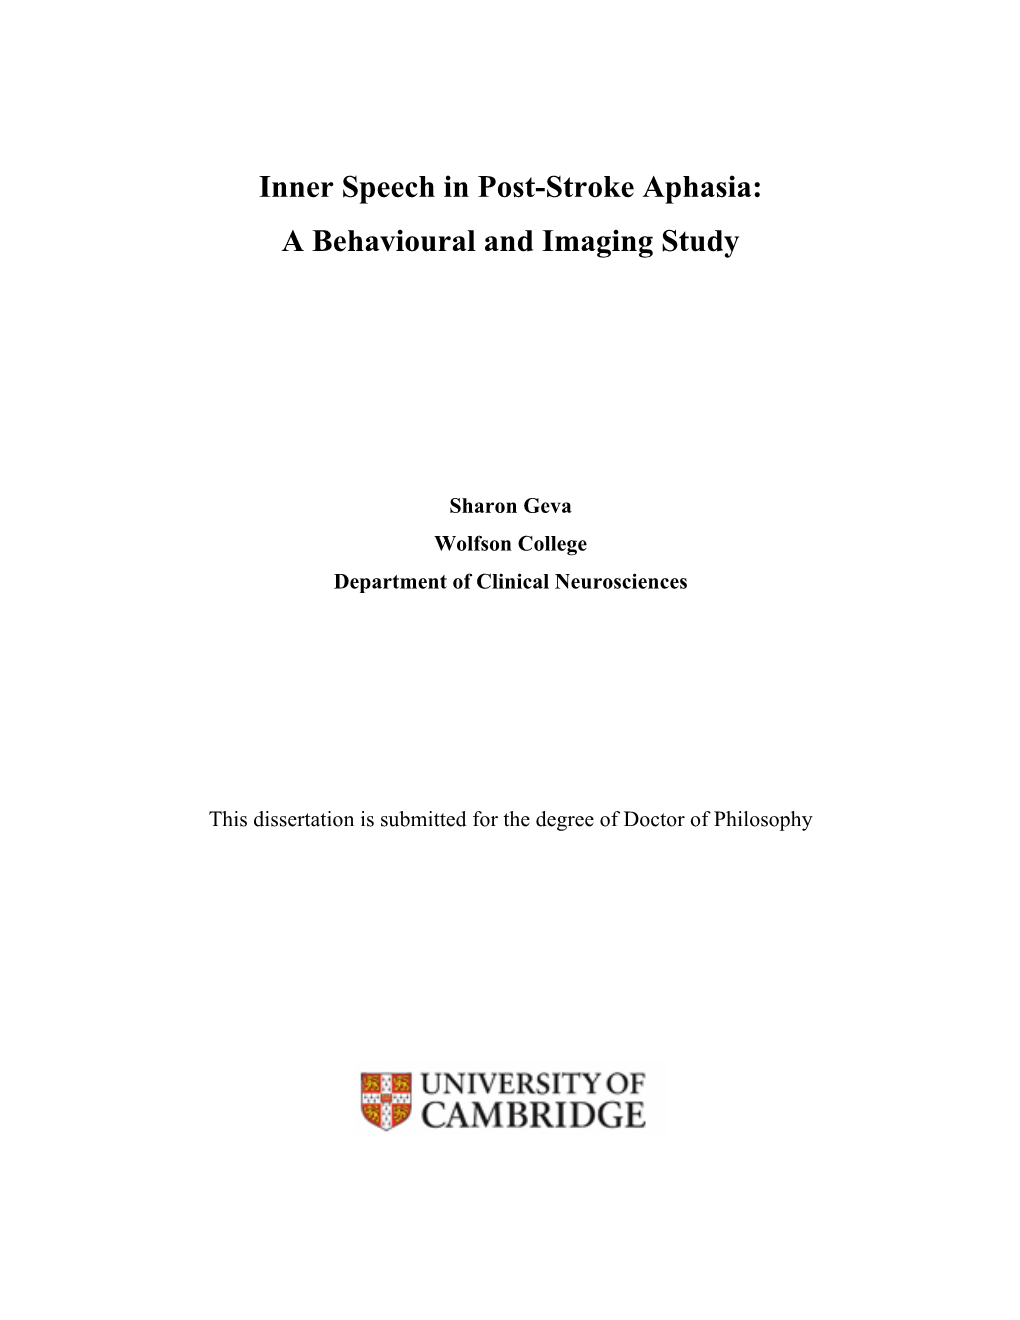 Inner Speech in Post-Stroke Aphasia: a Behavioural and Imaging Study